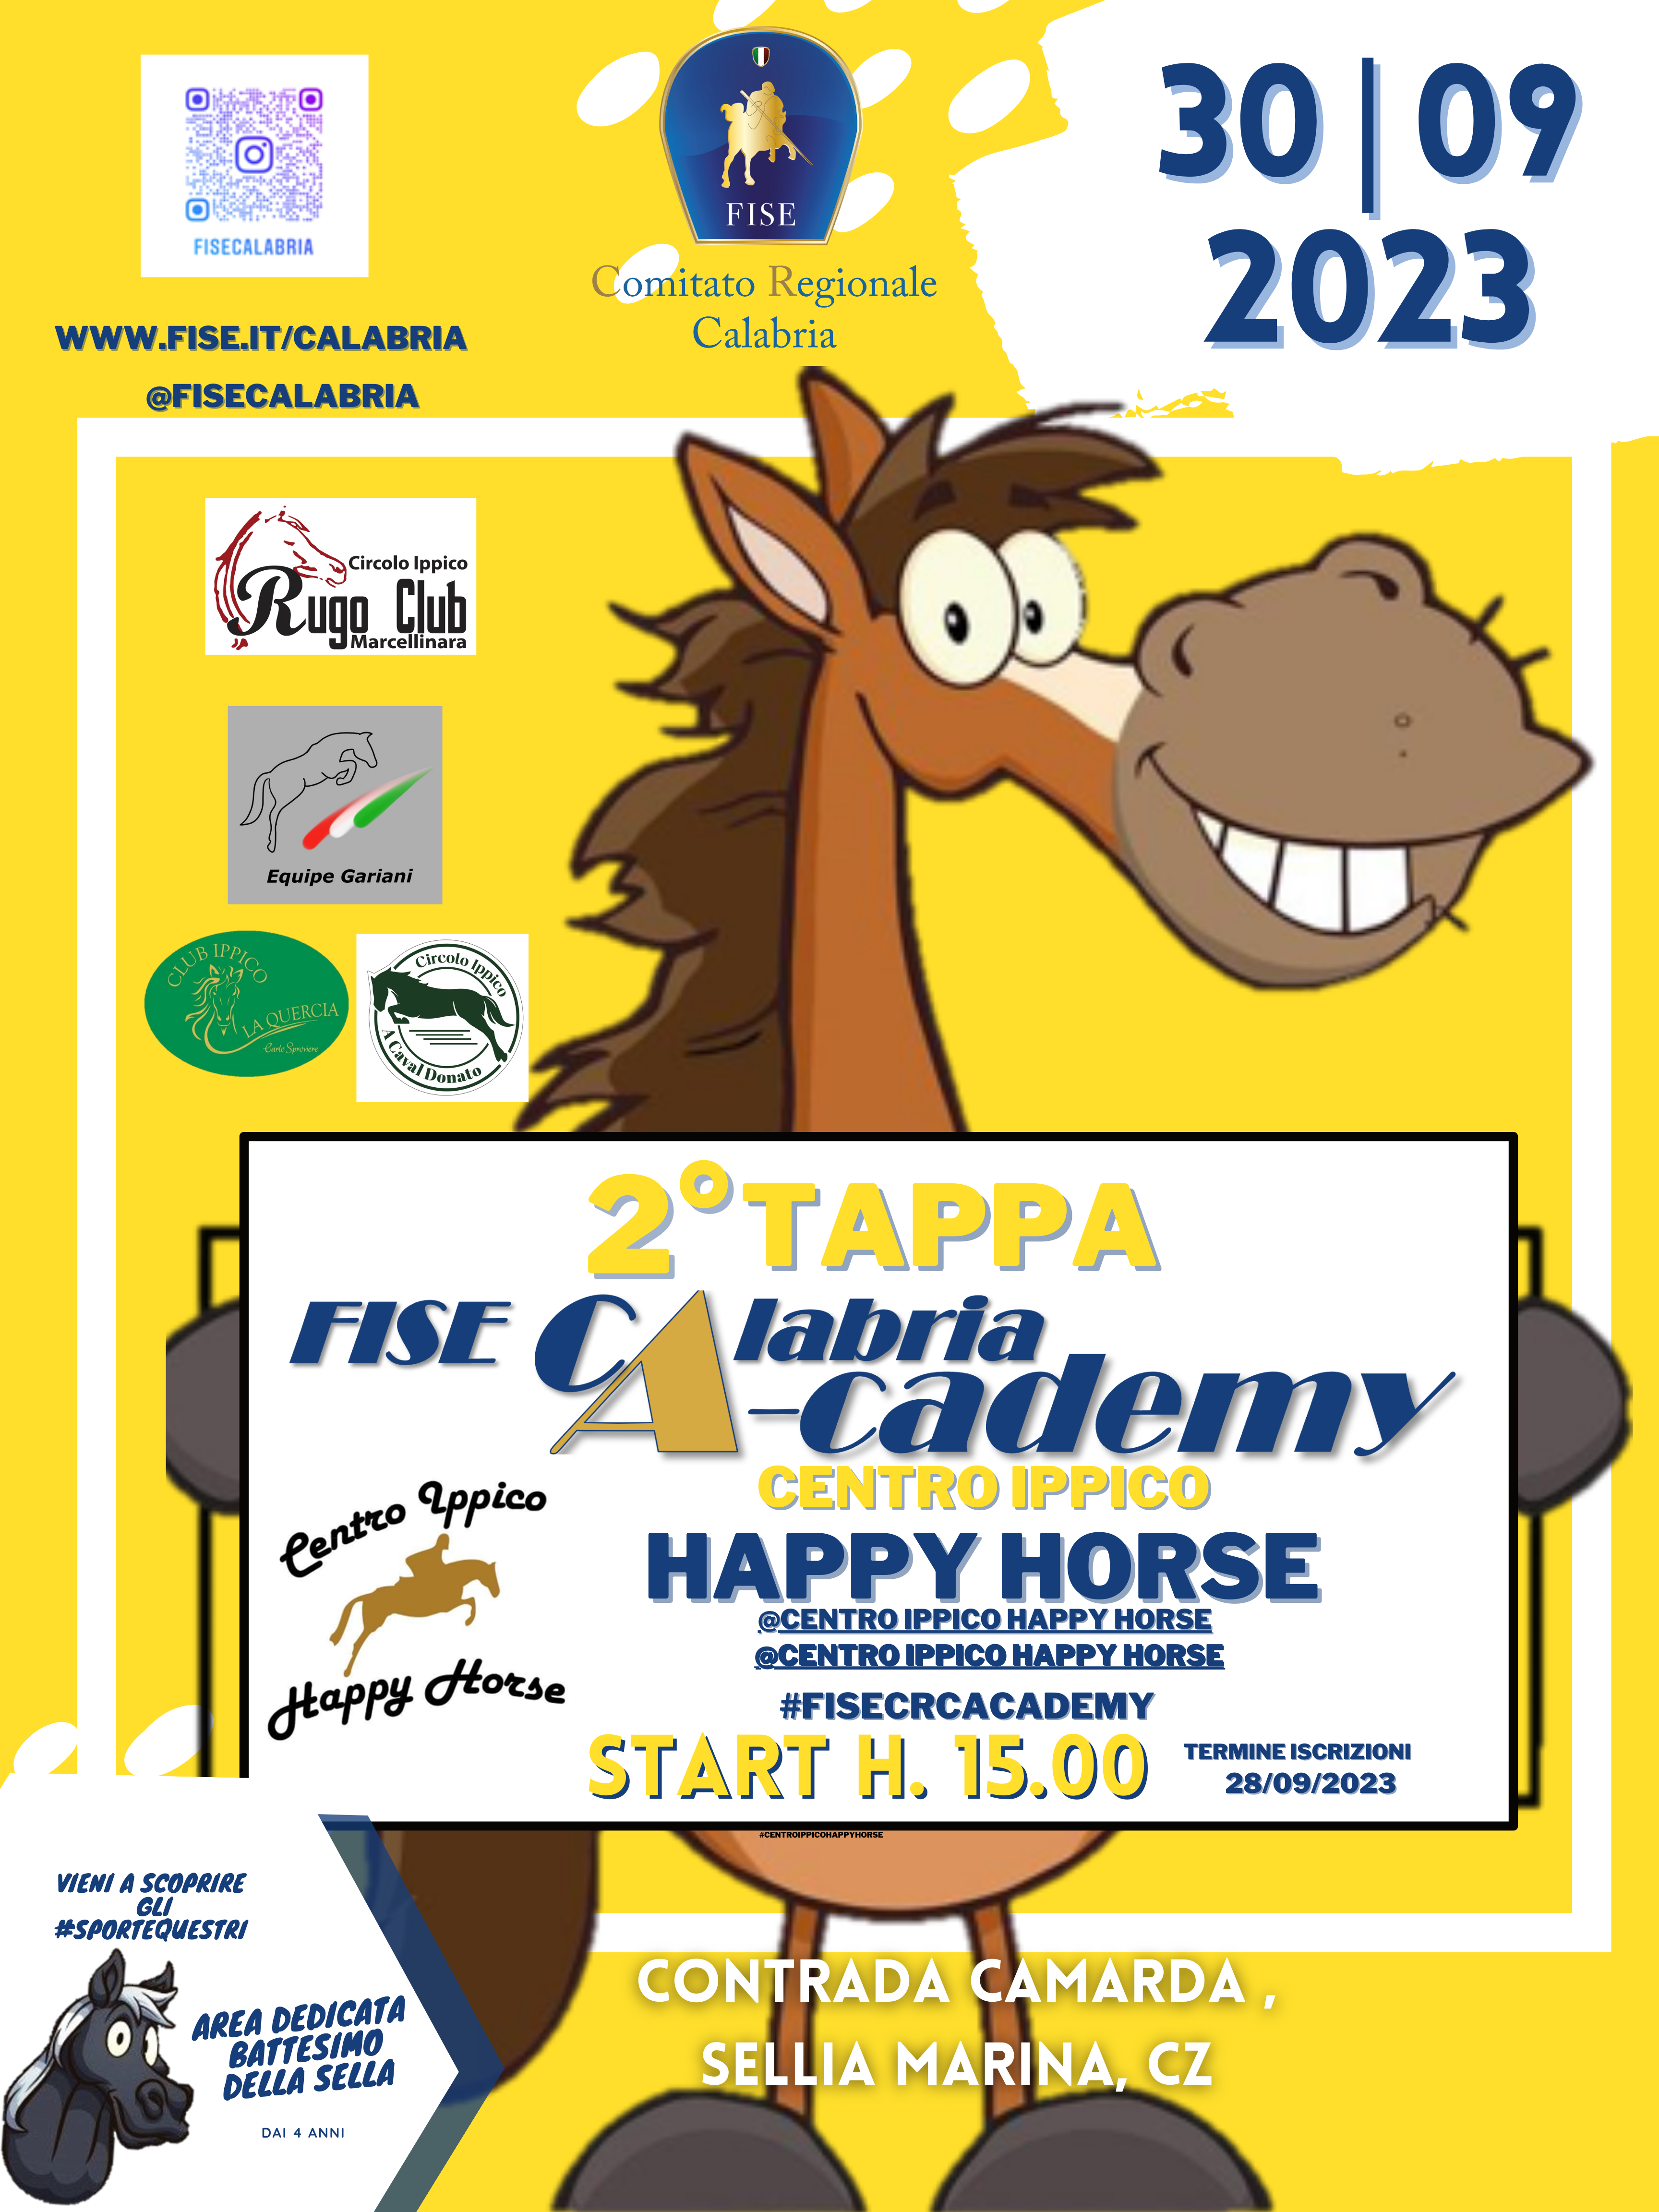 A-cademy 2023 II tappa happy horse.png